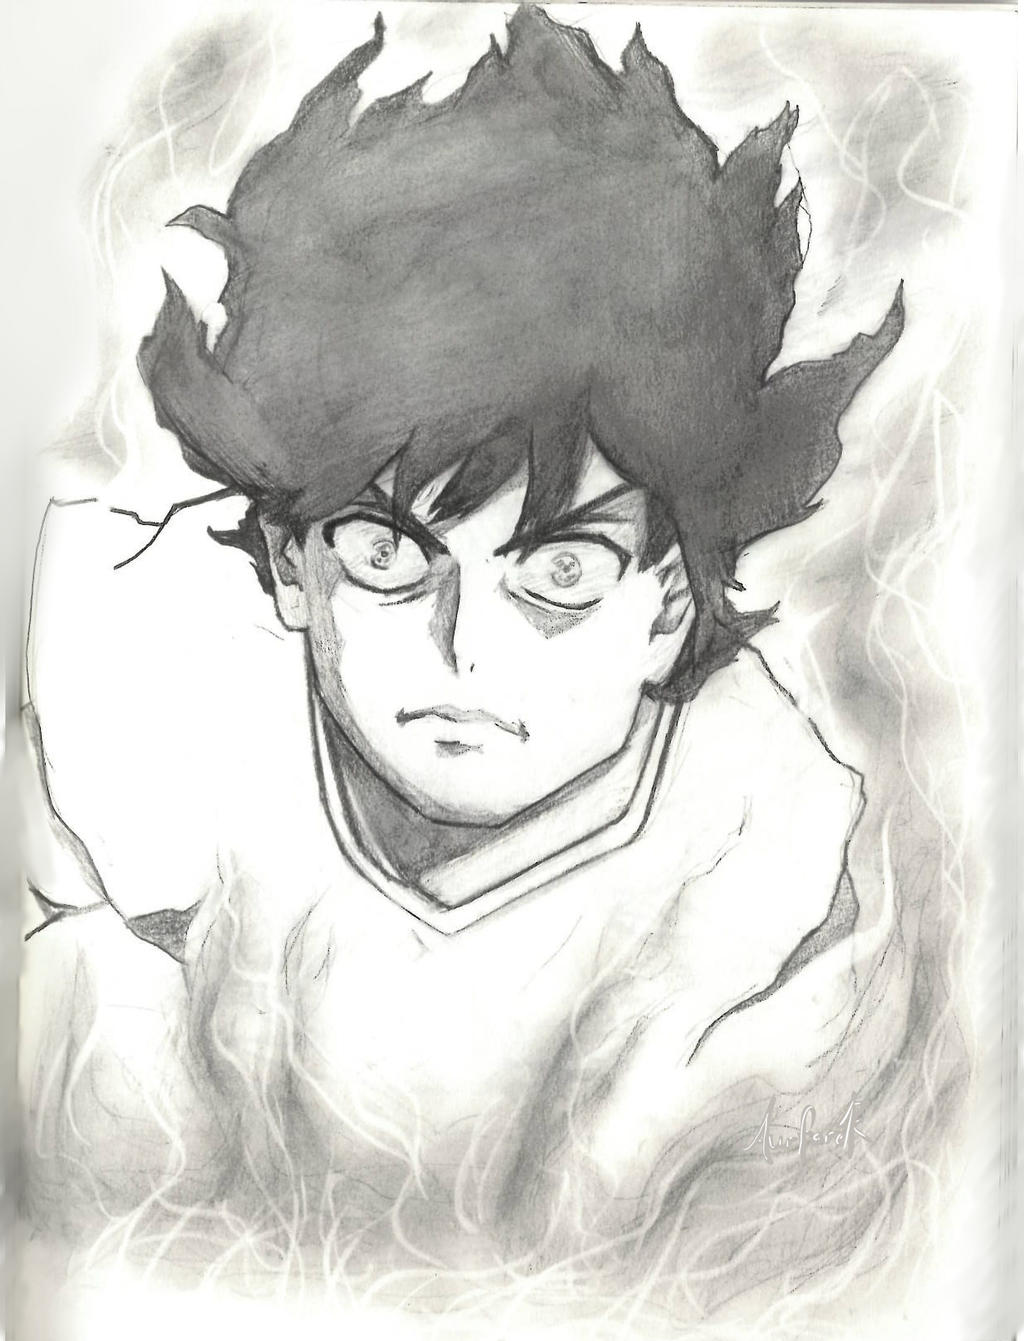 Just started watching Mob Psycho and I'm obsessed. So I drew this picture  of Mob today. : r/Mobpsycho100